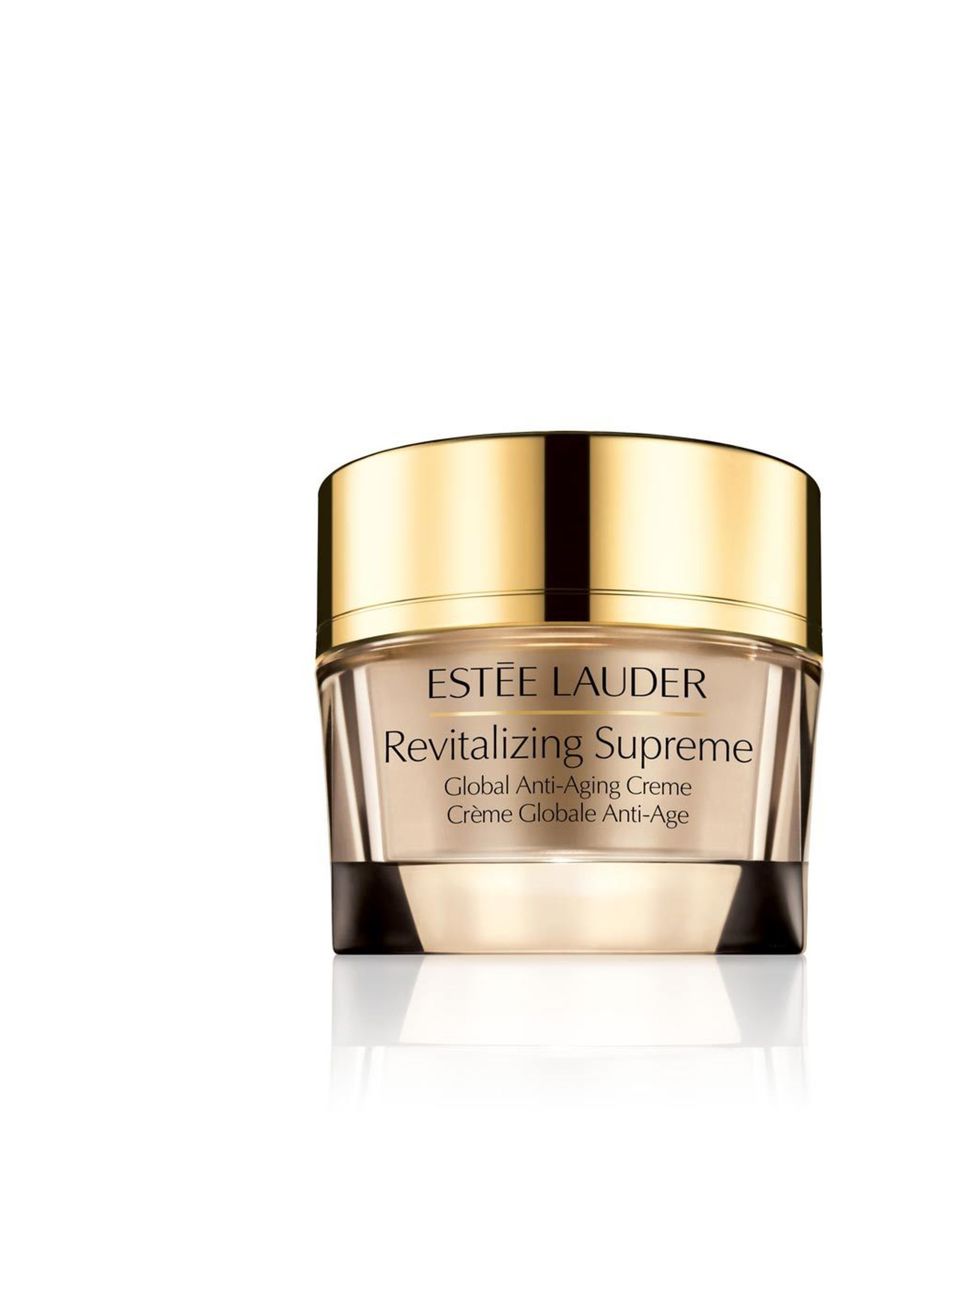 <p><a href="http://www.esteelauder.co.uk/product/688/20707/Product-Catalog/Skincare/By-Category/Moisturisers/Revitalizing-Supreme/Global-Anti-Aging-Creme/index.tmpl">Estèe Lauder</a> Revitalizing Supreme Globale Anti-Ageing Crème £56</p>